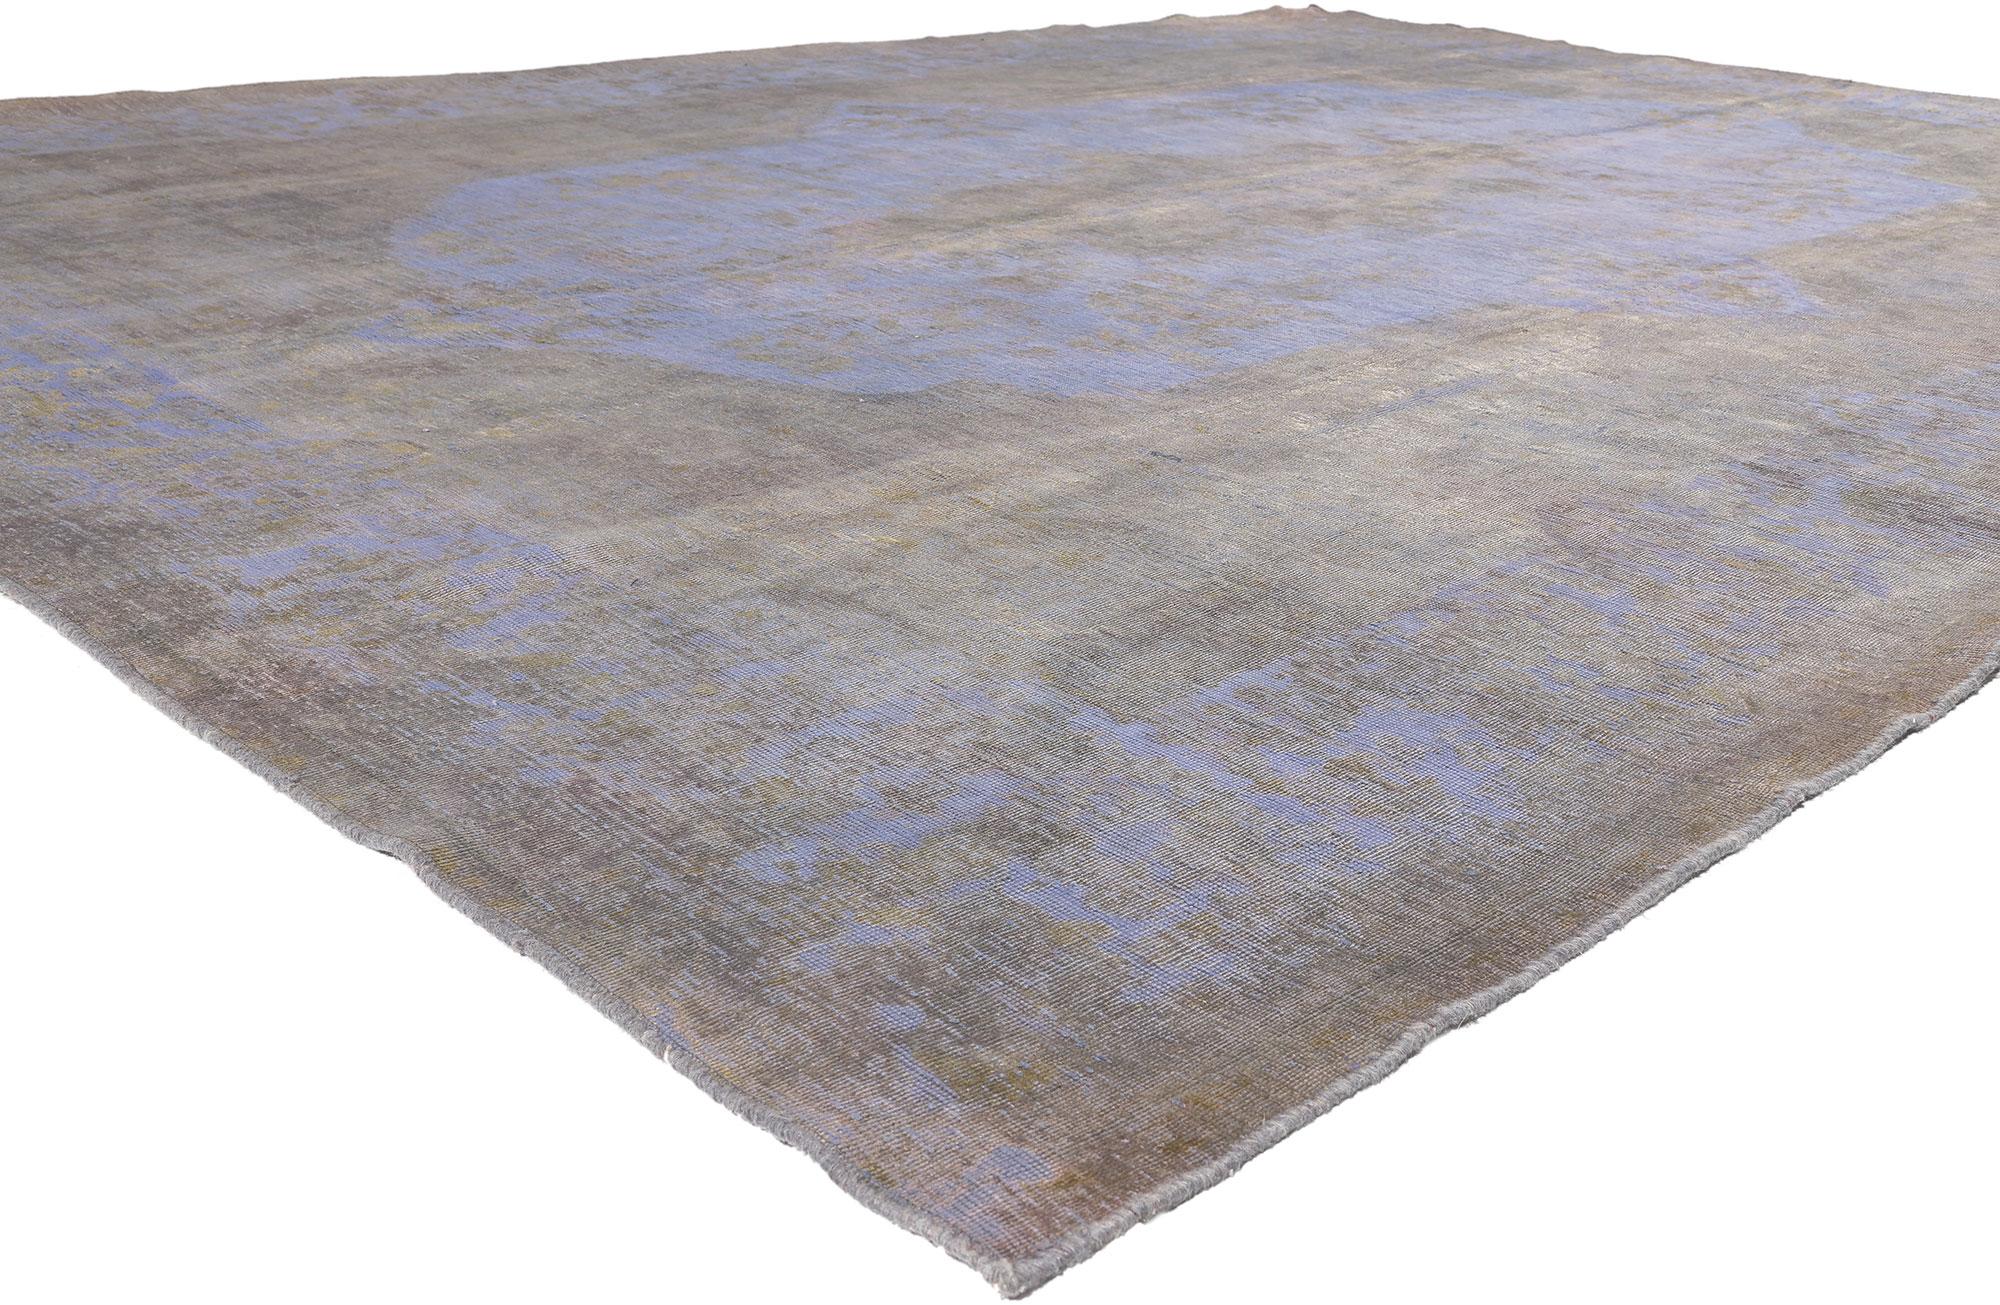 60784 Vintage Turkish Overdyed Rug, 09’06 x 12’10. 
Combing a timeless design with chromatic brilliancy, this hand-knotted wool distressed vintage Turkish overdyed rug beautifully embodies an Industrial French style with Boho Chic vibes. It features